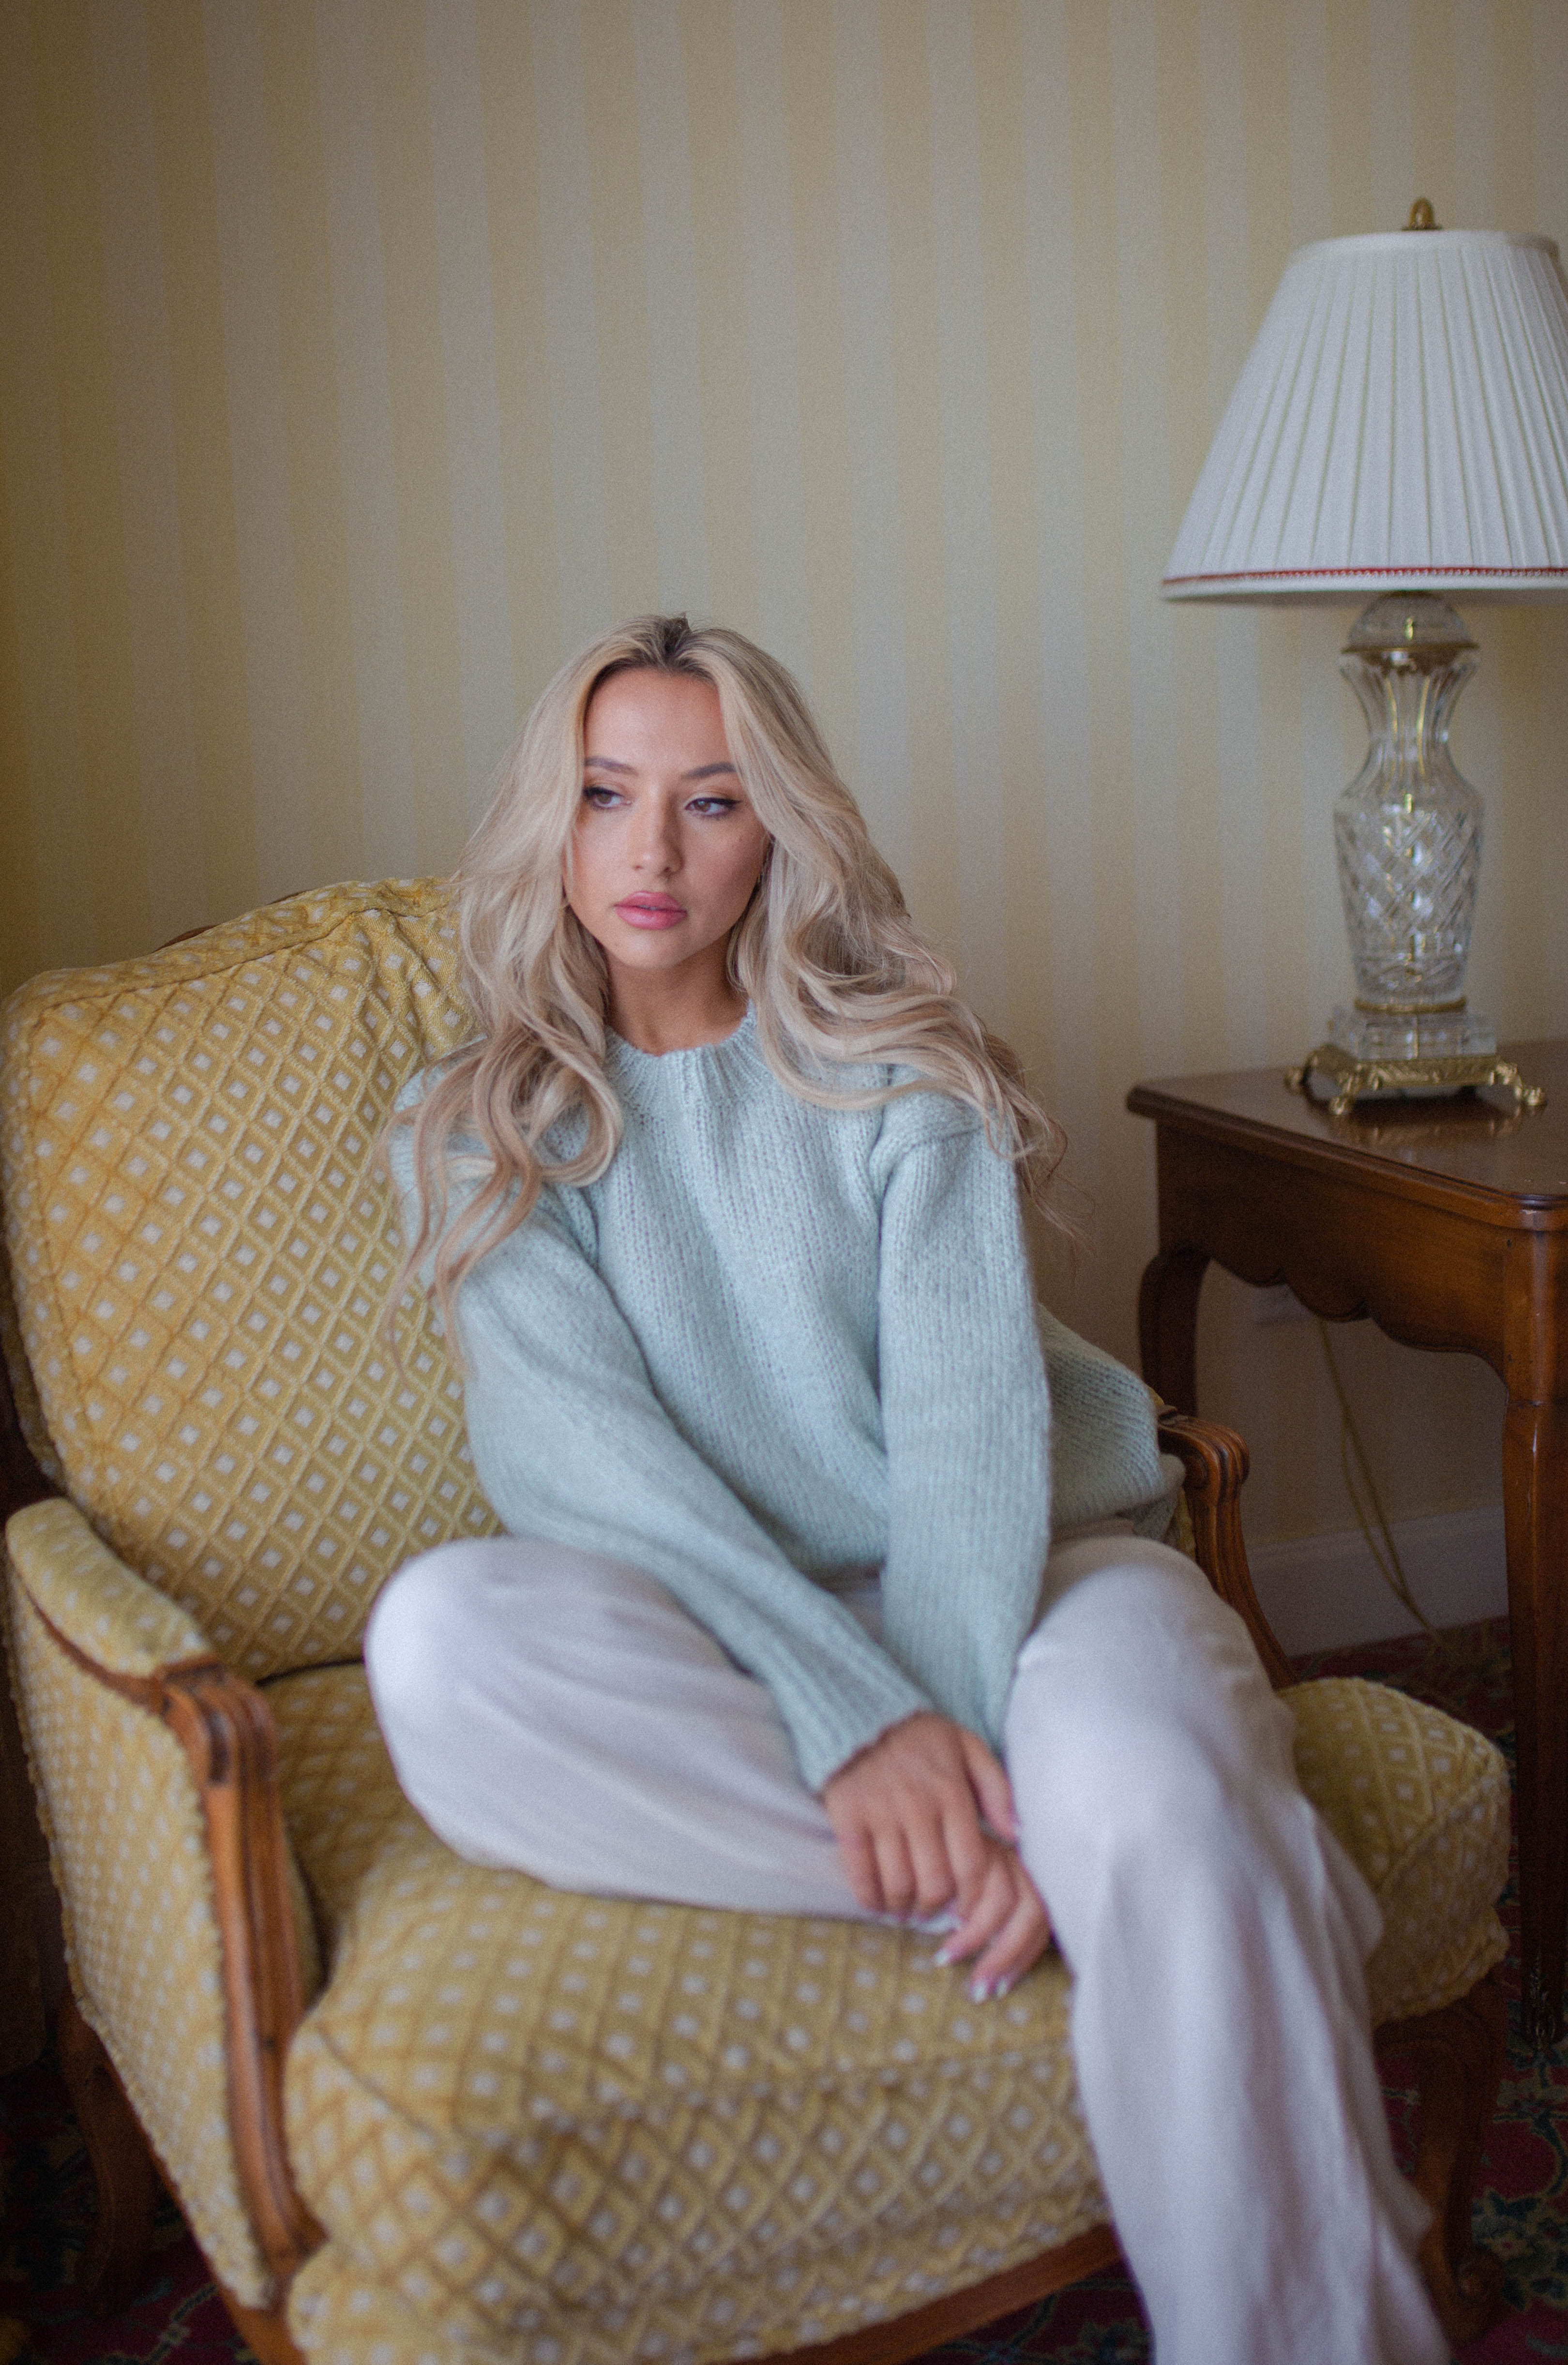 lounge in style in the English Factory Mint Sage Green knit sweater that is perfect for spring.